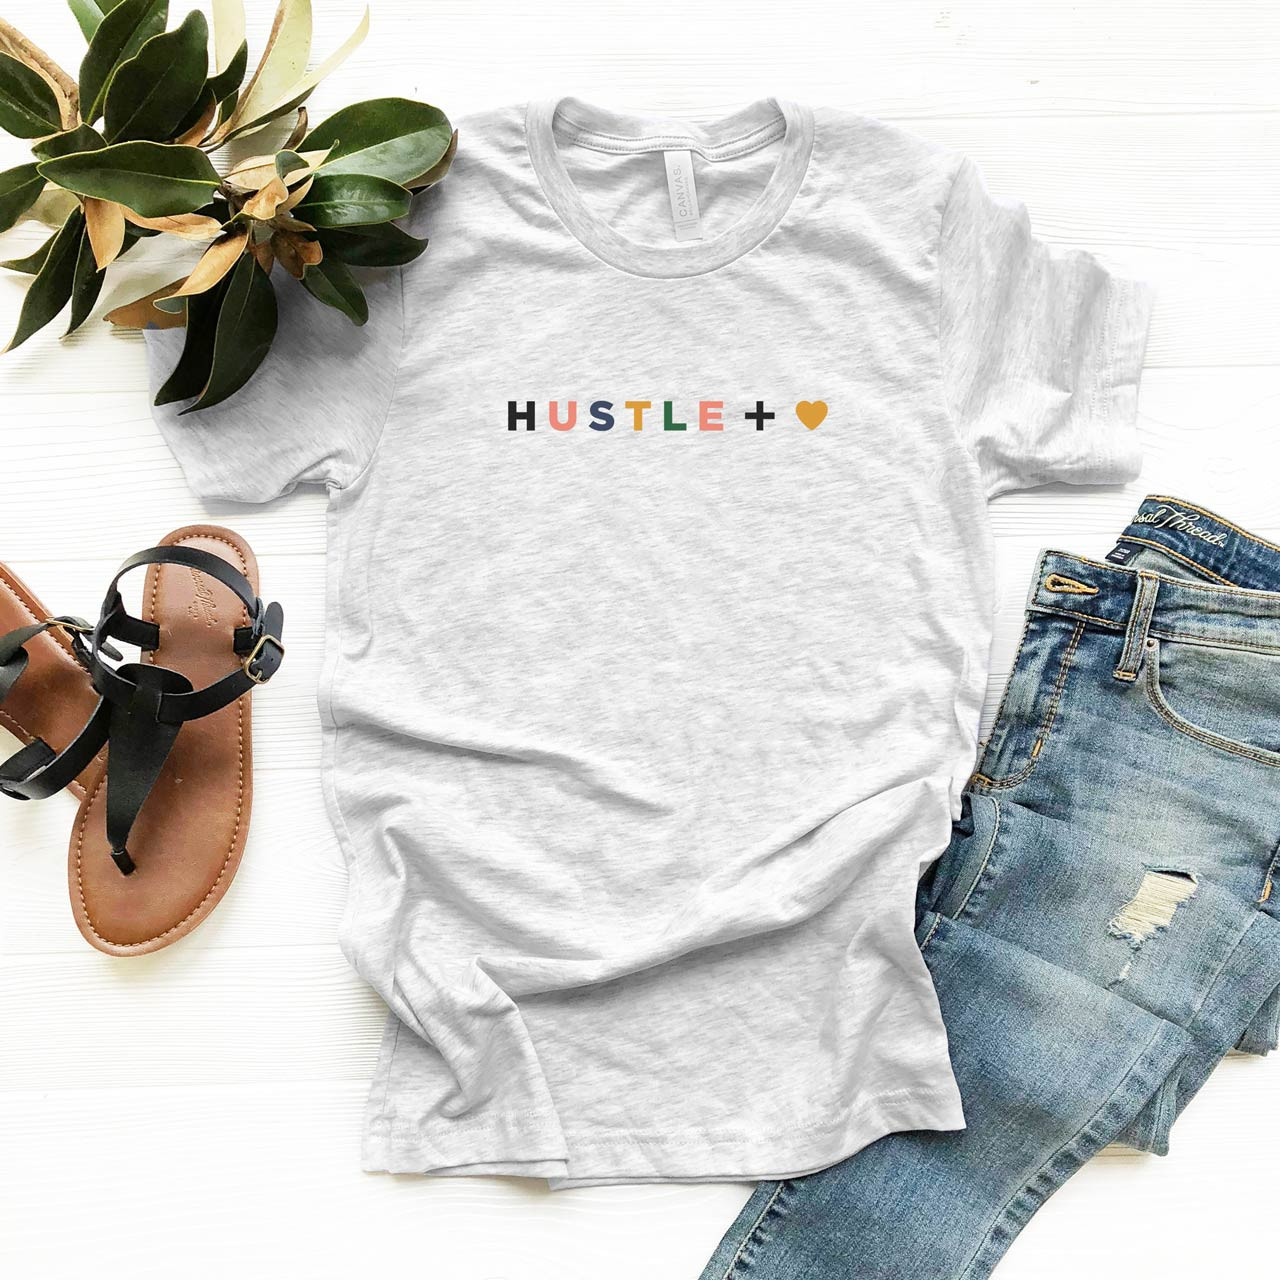 'HUSTLE + HEART' Vintage T-Shirt (Color on Light Gray Fleck) from The Printed Home